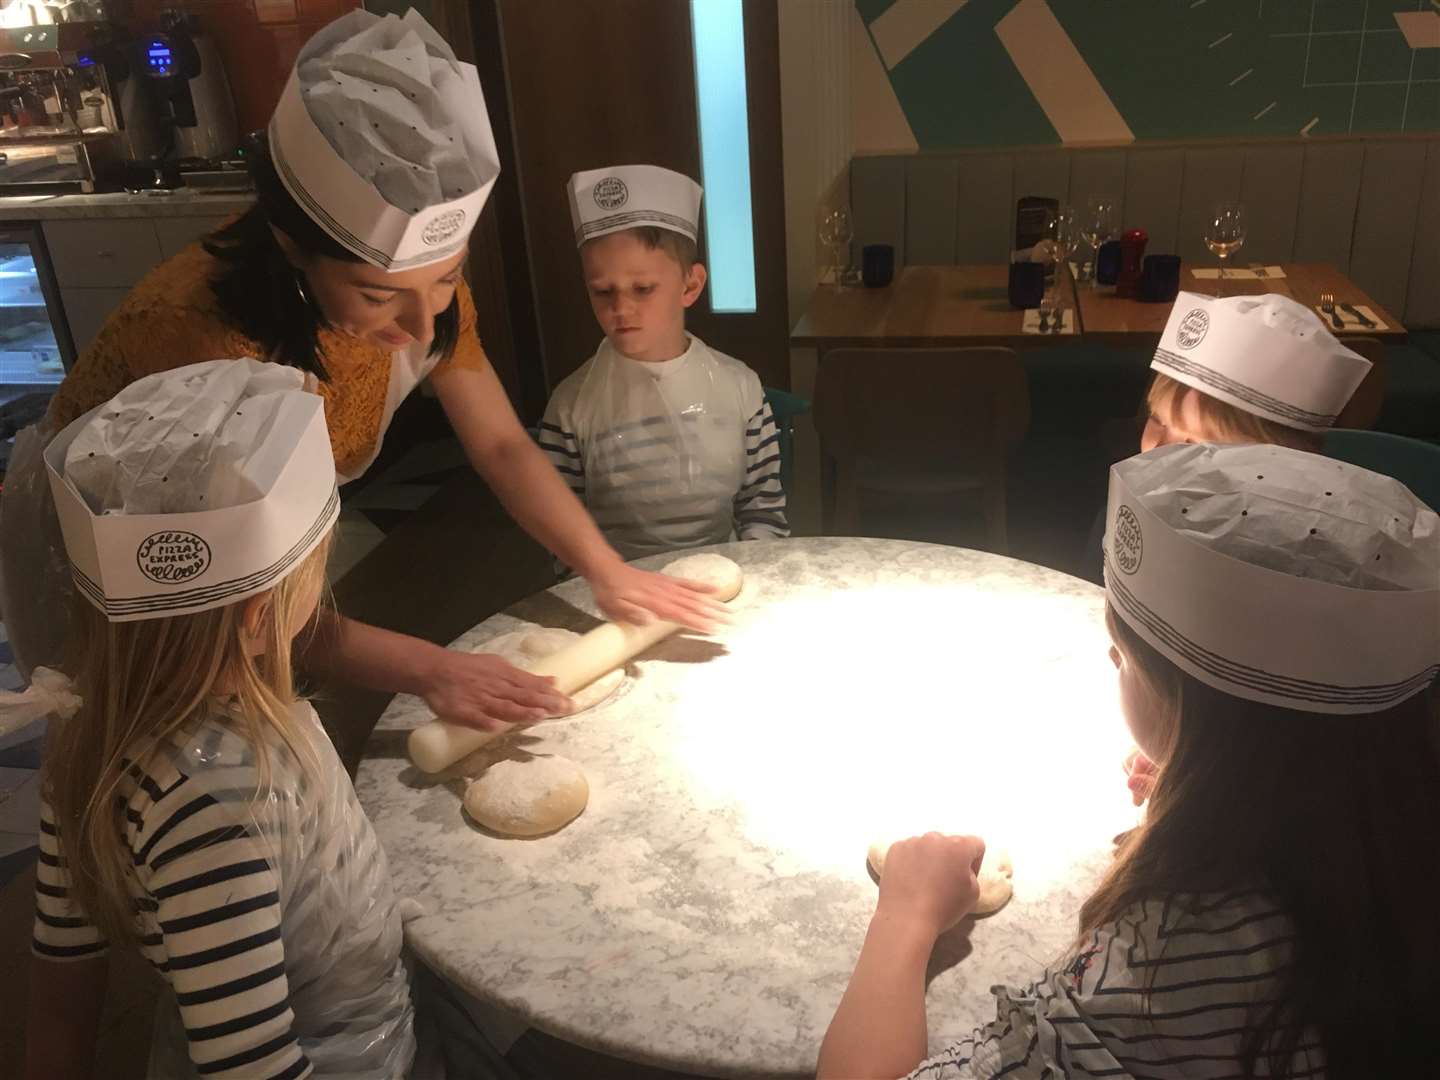 Suzy, manager of Bluewater's latest Pizza Express restaurant takes the children through the process of making a pizza